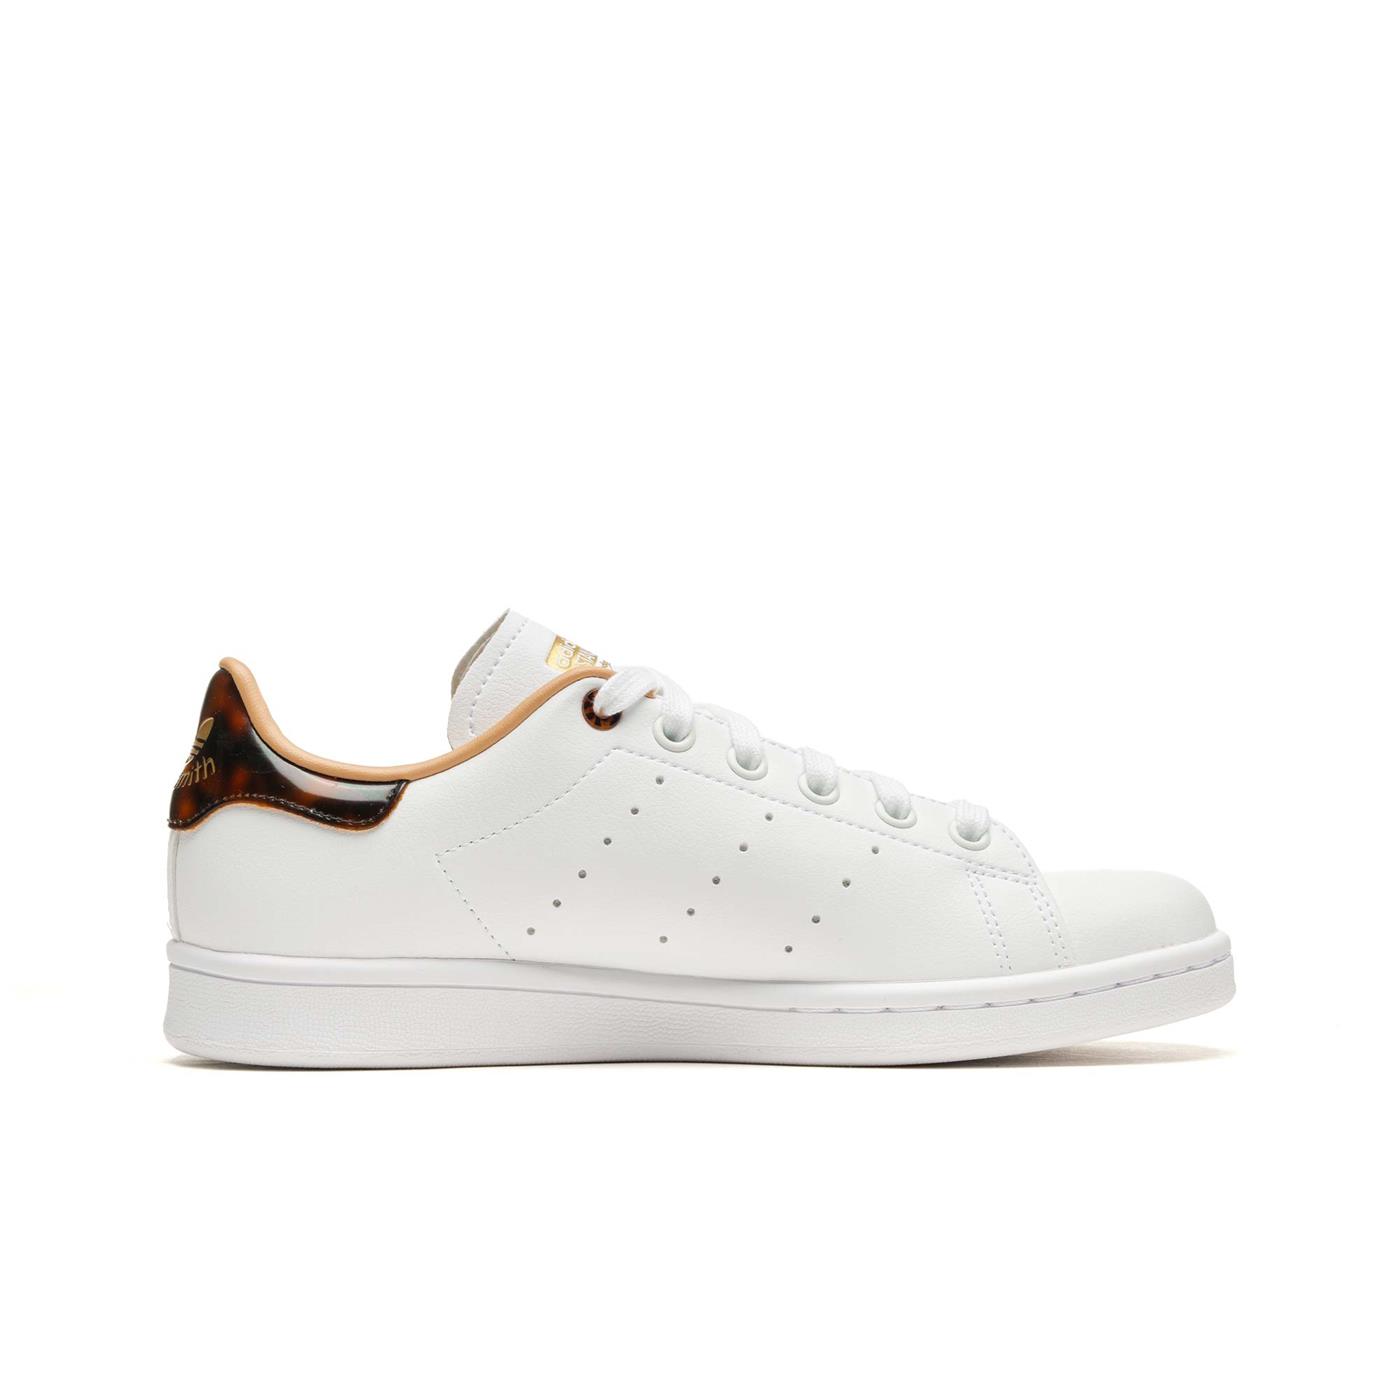 Adidas Stan Smith Cloud White / Matte Gold / Pale Nude - GY5909